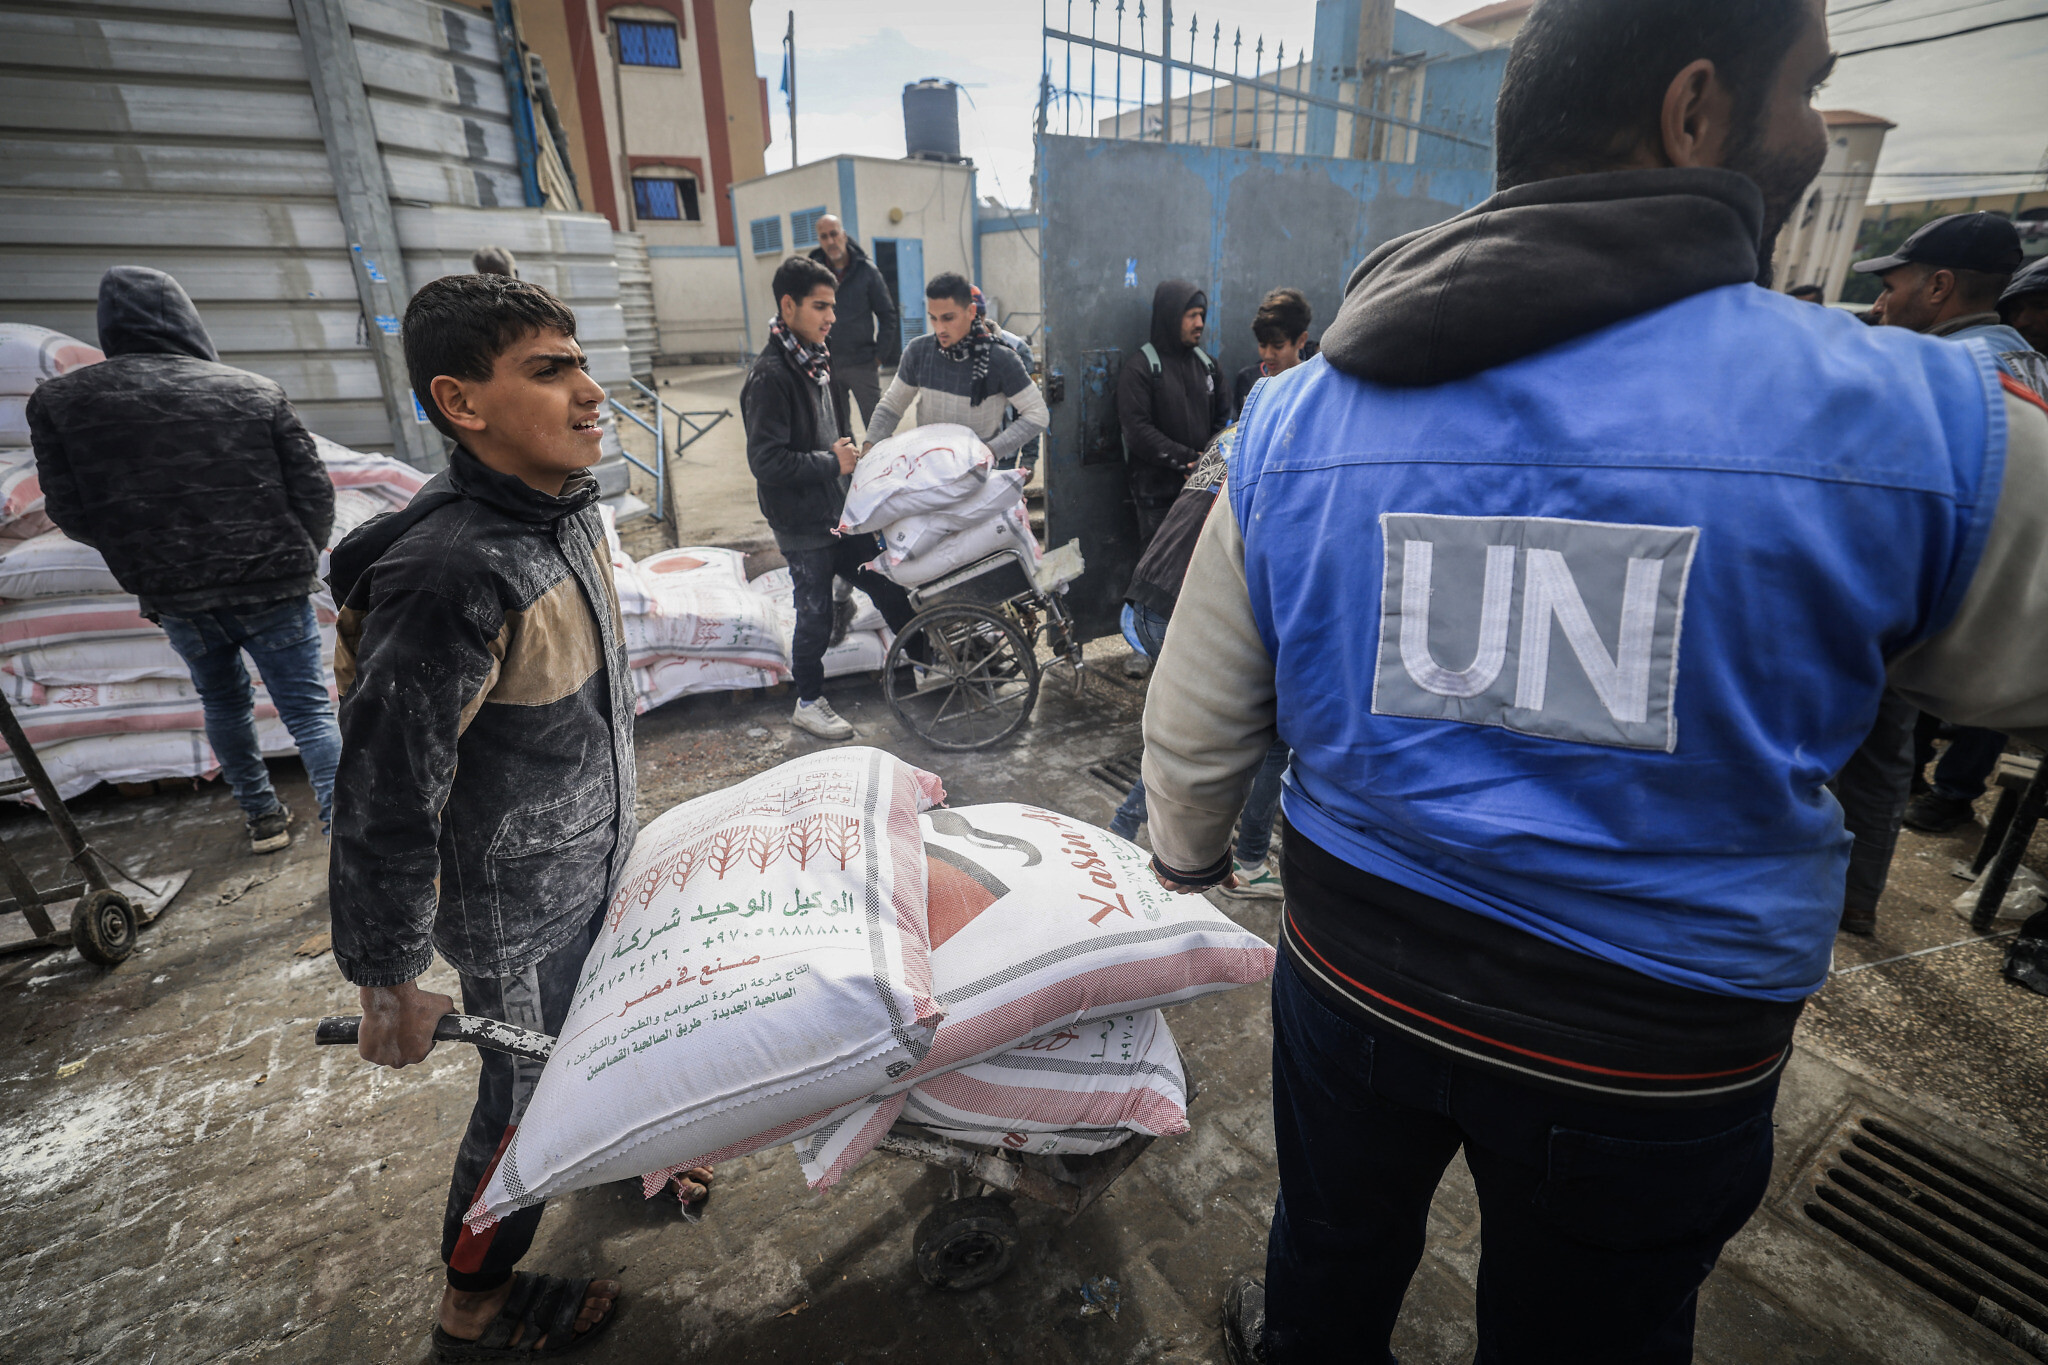 Former French minister Colonna reviewed UNRWA's neutrality and response (Credits: AFP)